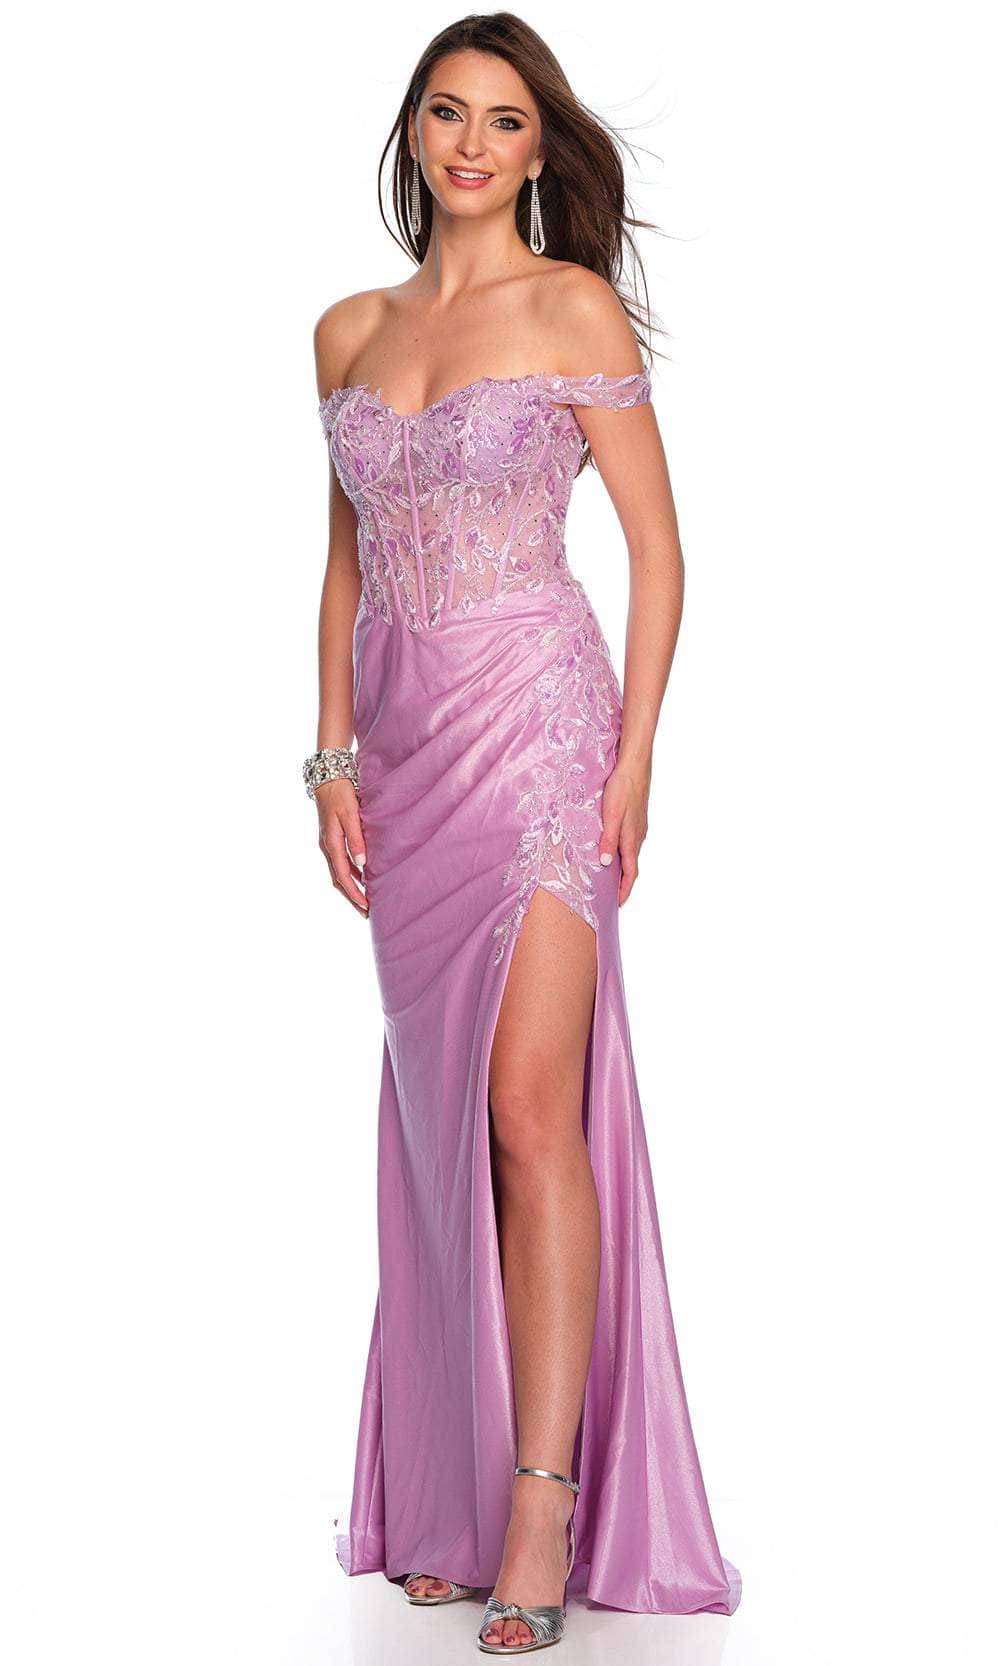 Dave & Johnny 11240 - Off Shoulder Embroidered Corset Prom Gown
